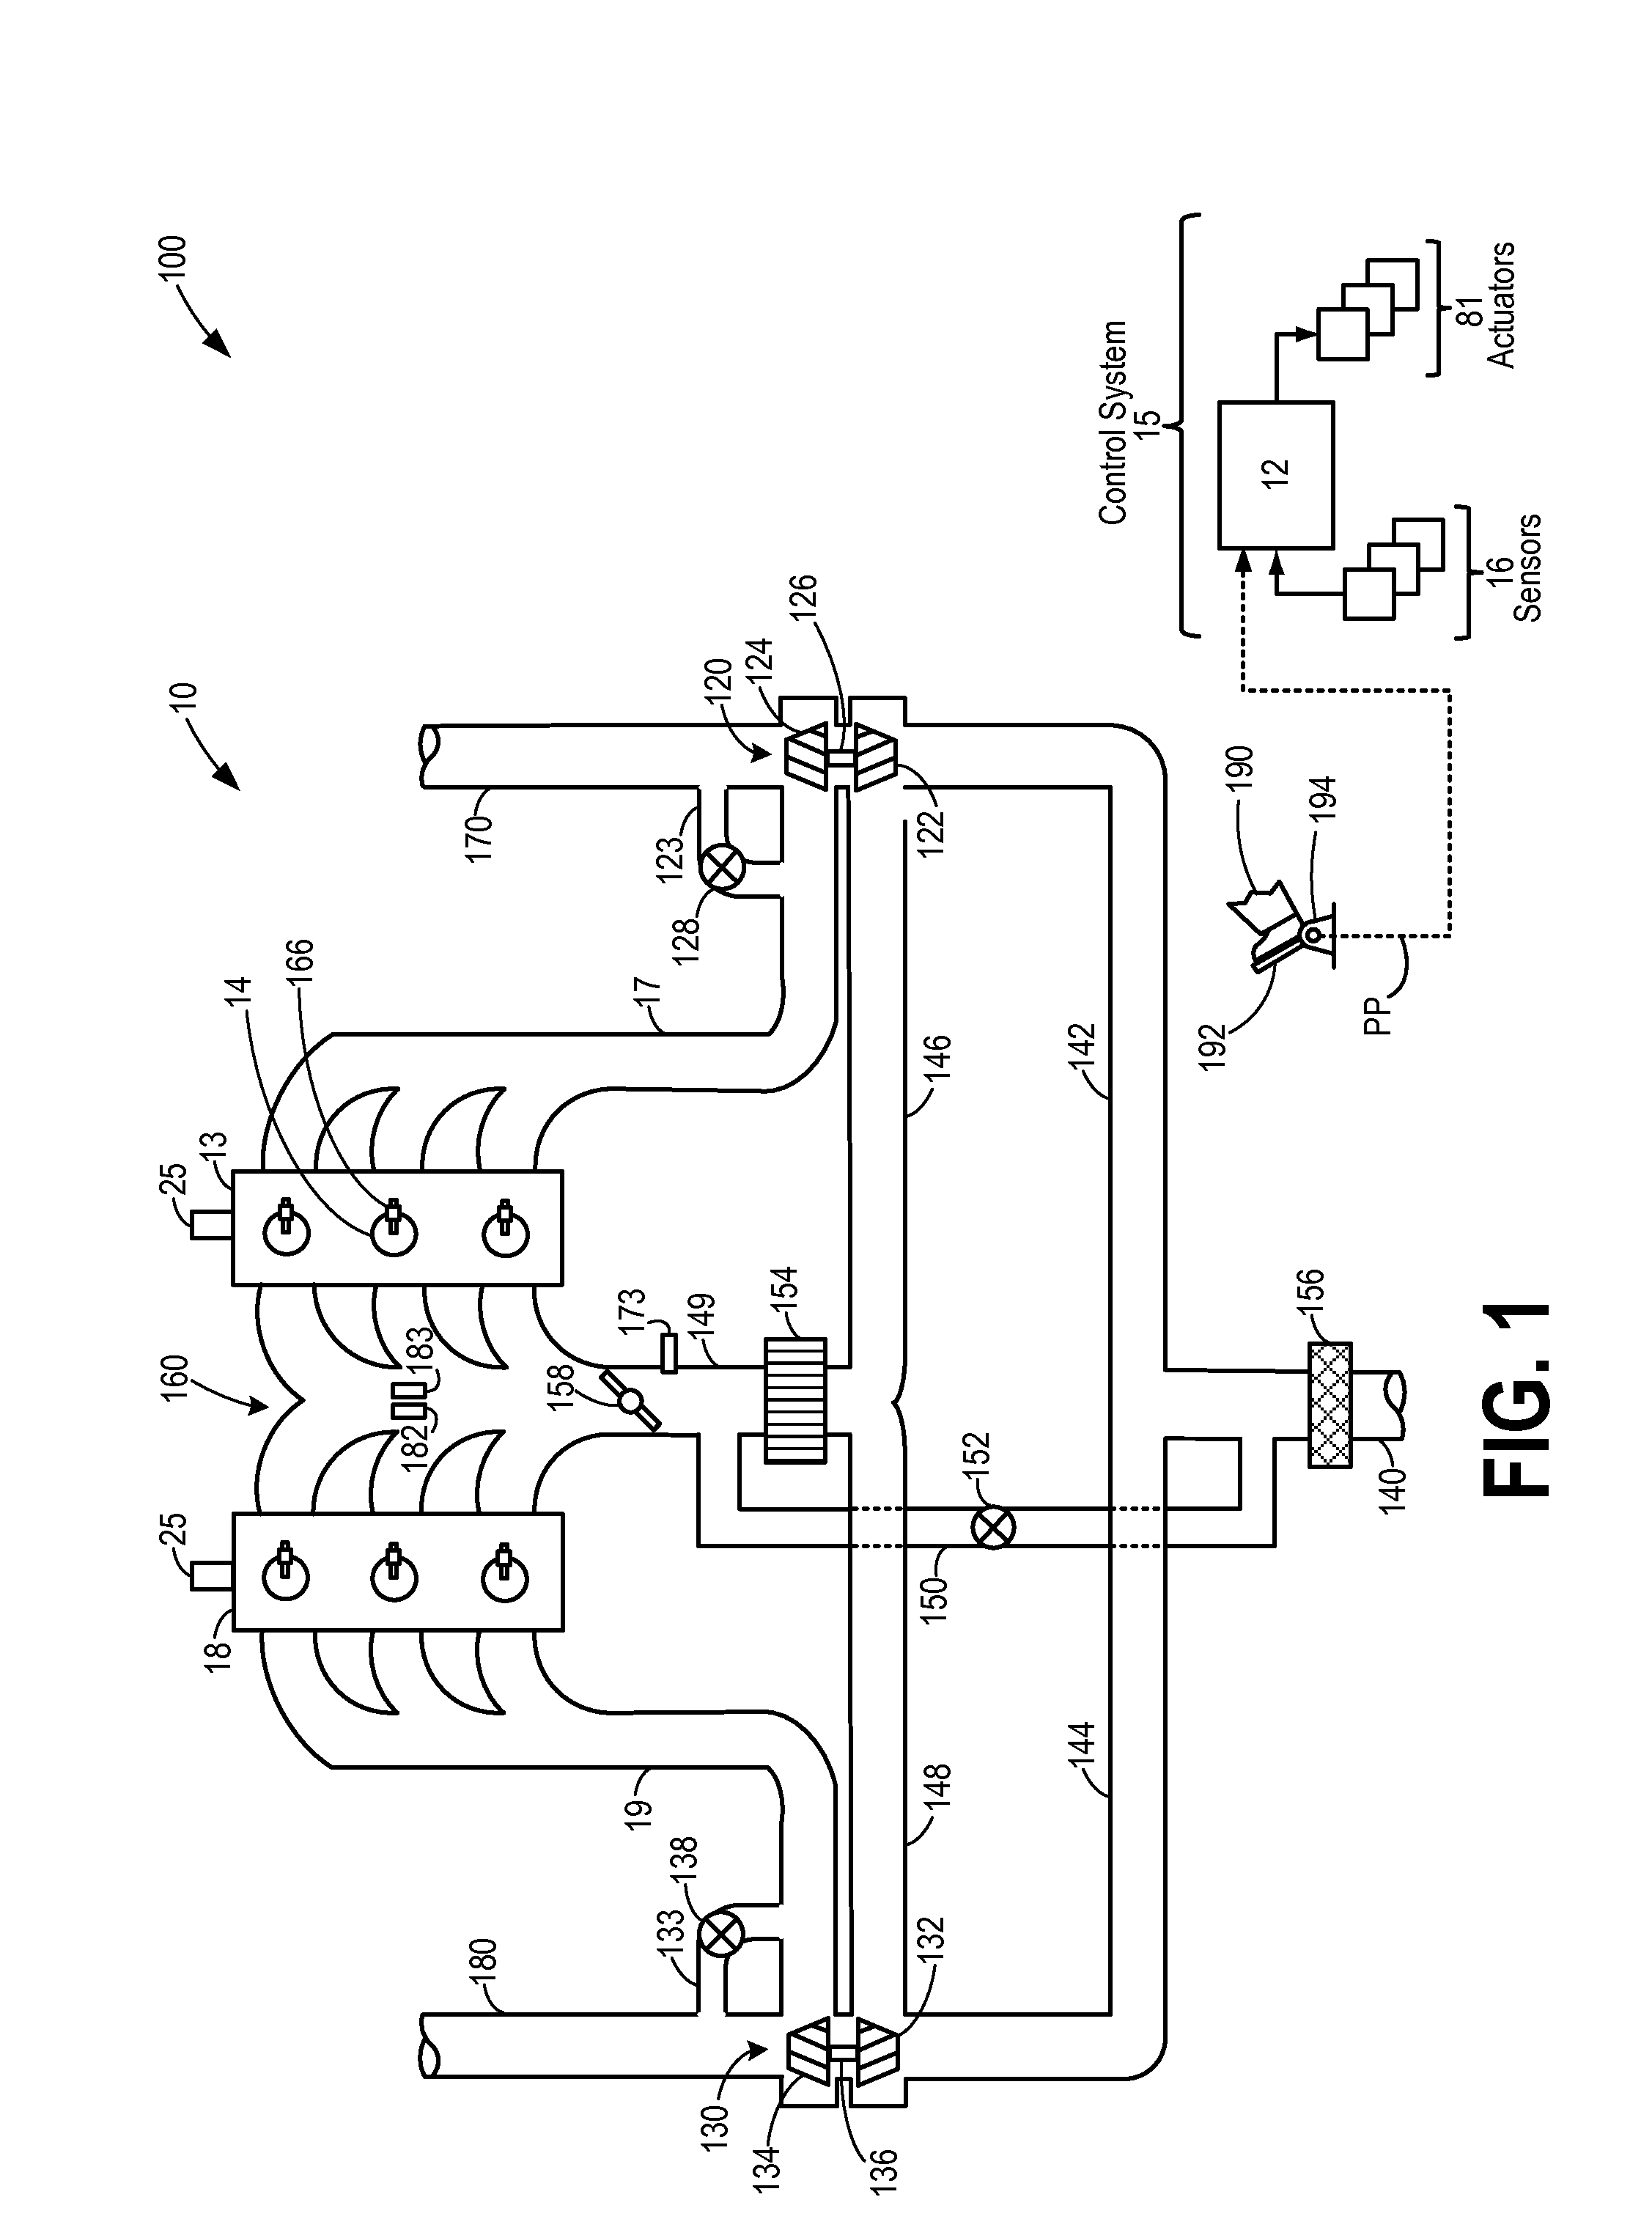 Methods and systems for surge control